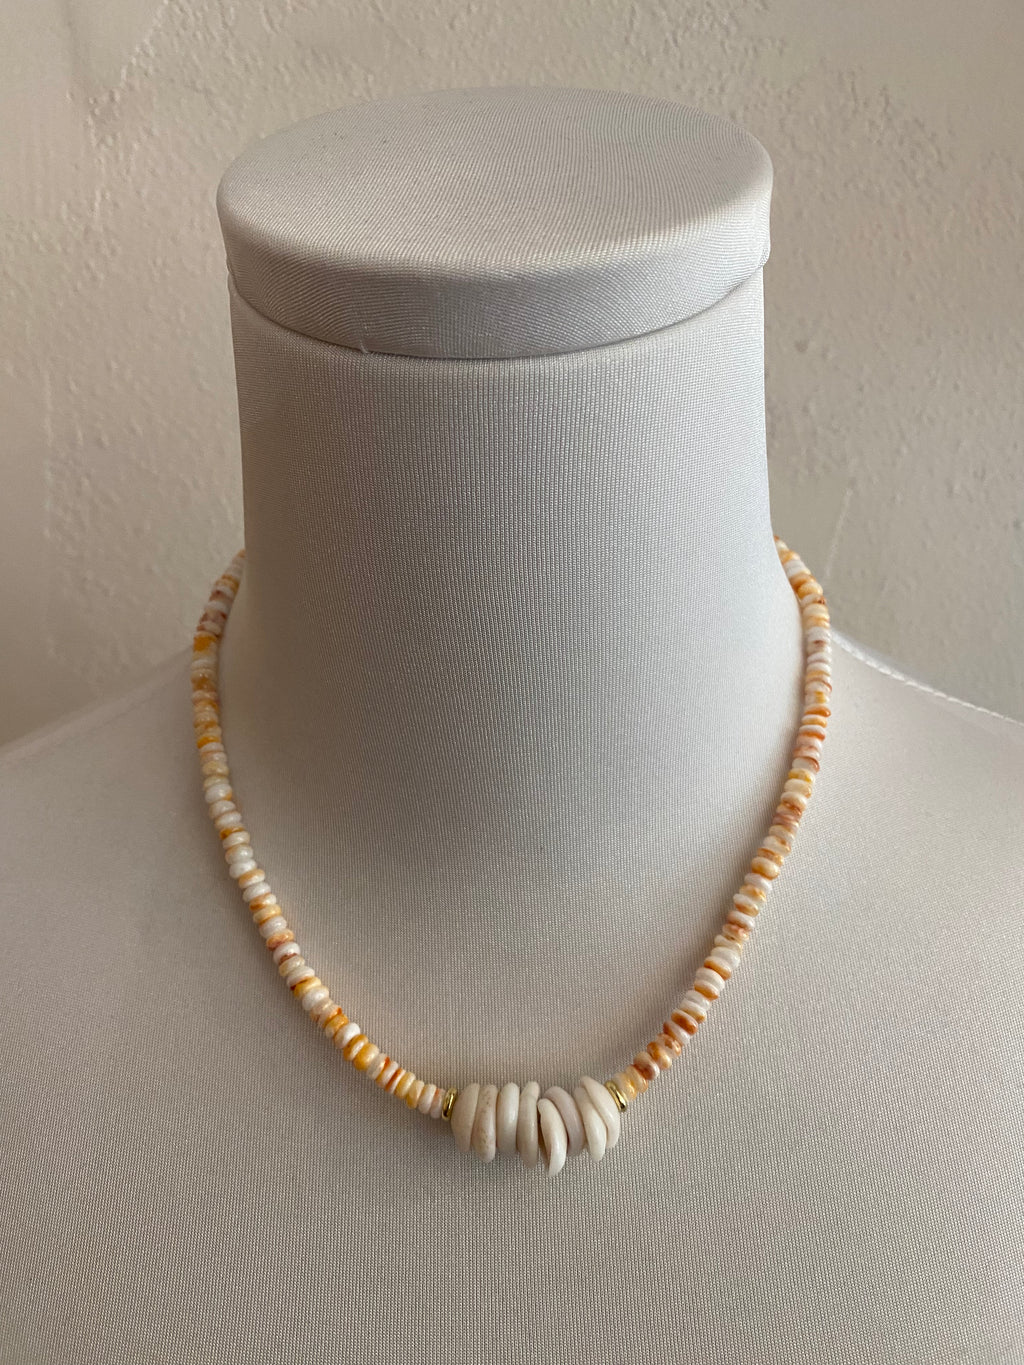 Spiny Oyster and Puka Necklace